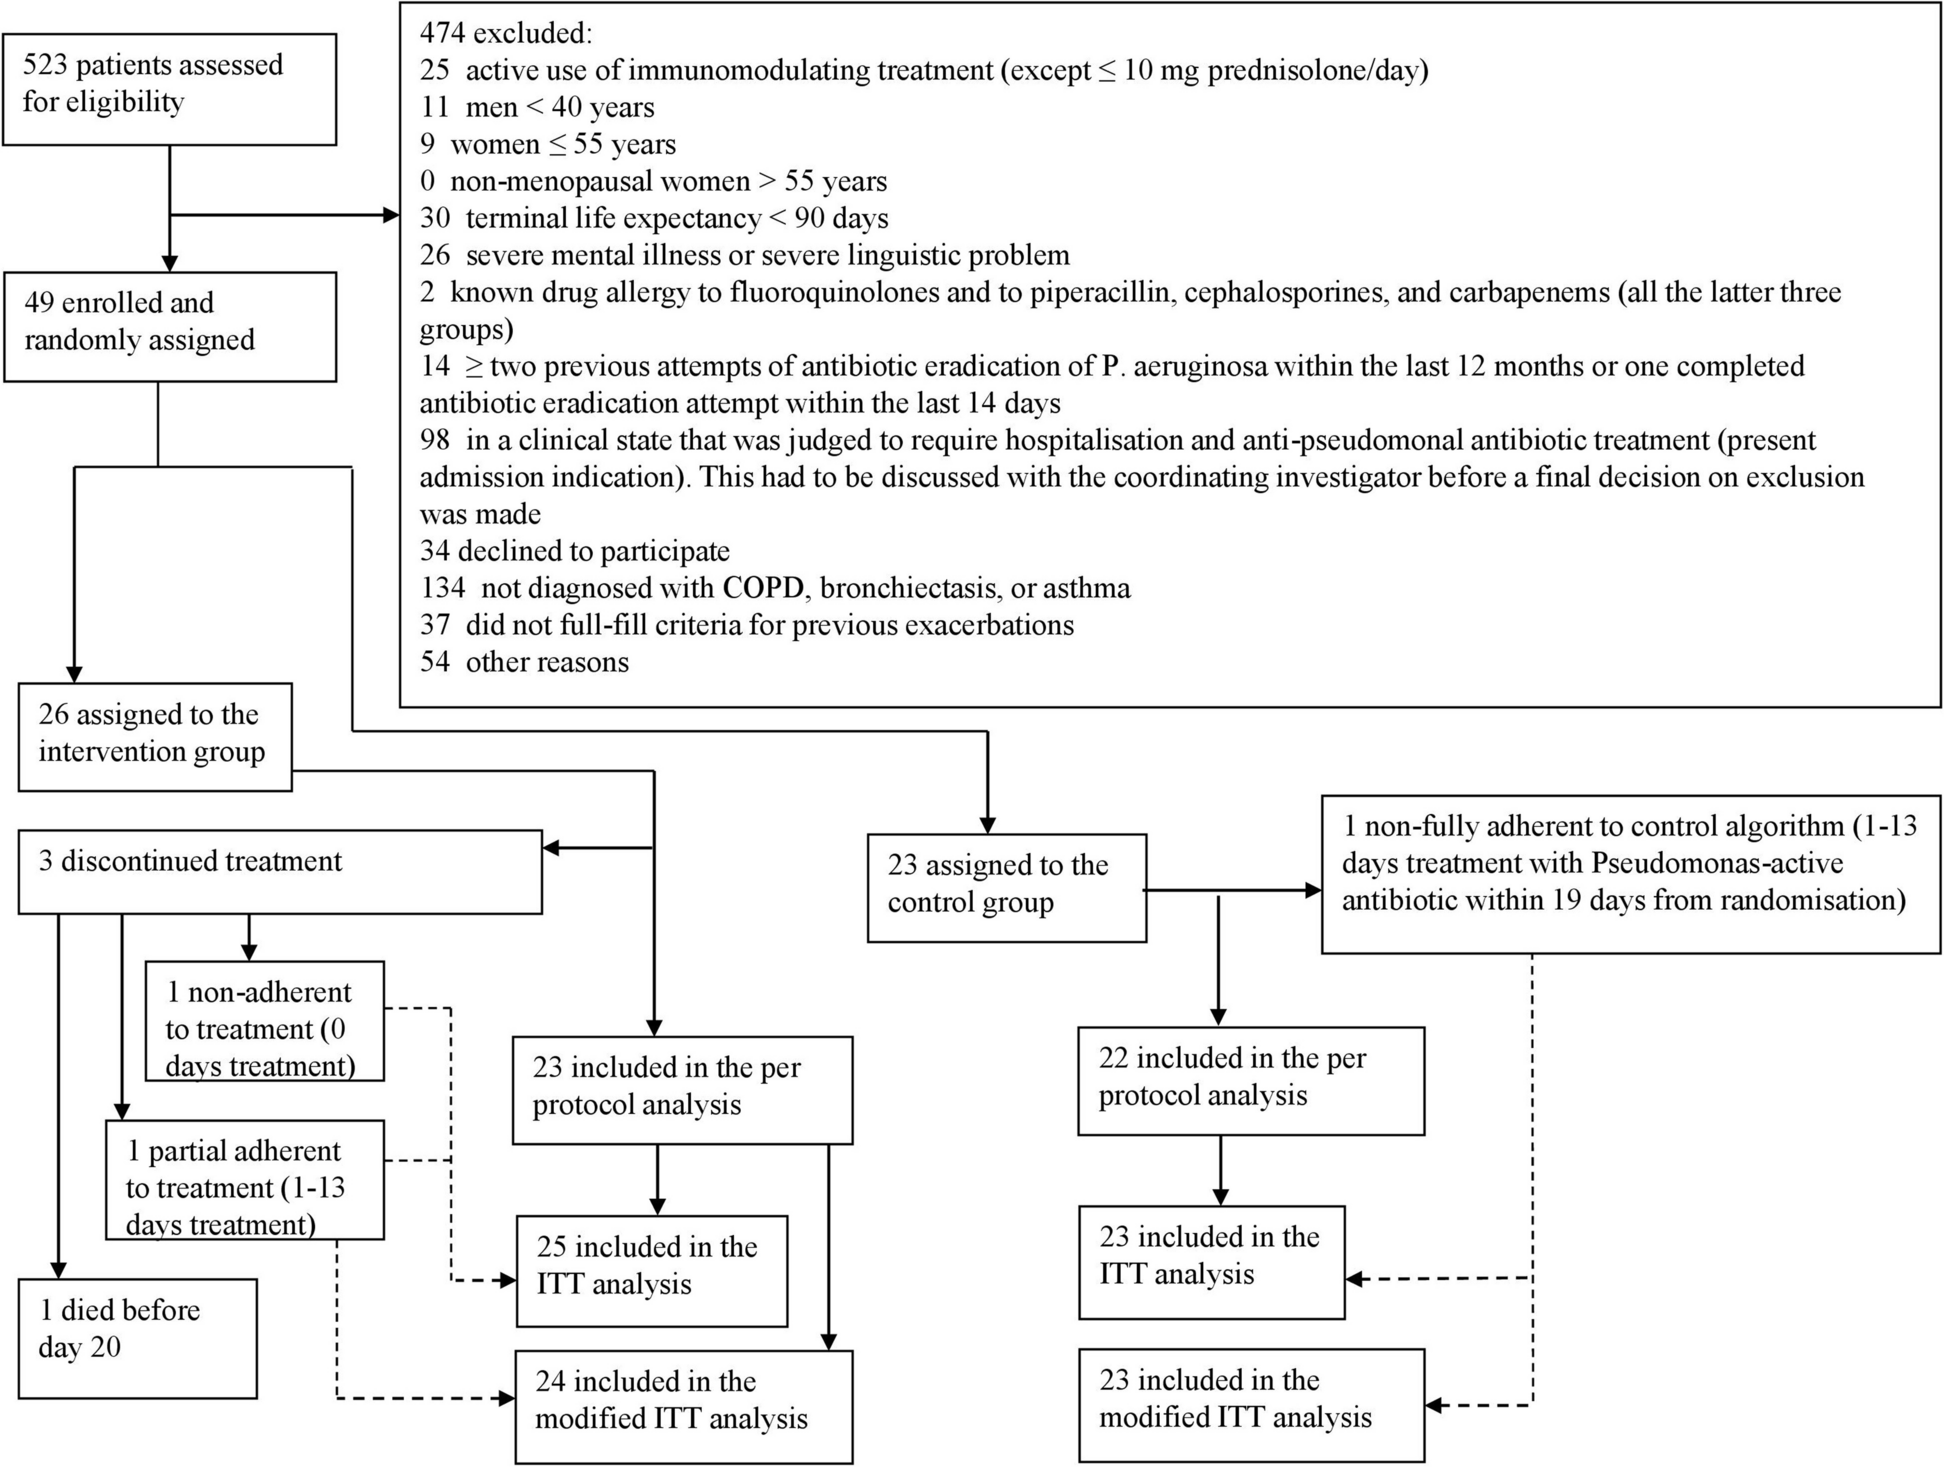 Systemic antibiotics for Pseudomonas aeruginosa infection in outpatients with non-hospitalised exacerbations of pre-existing lung diseases: a randomised clinical trial